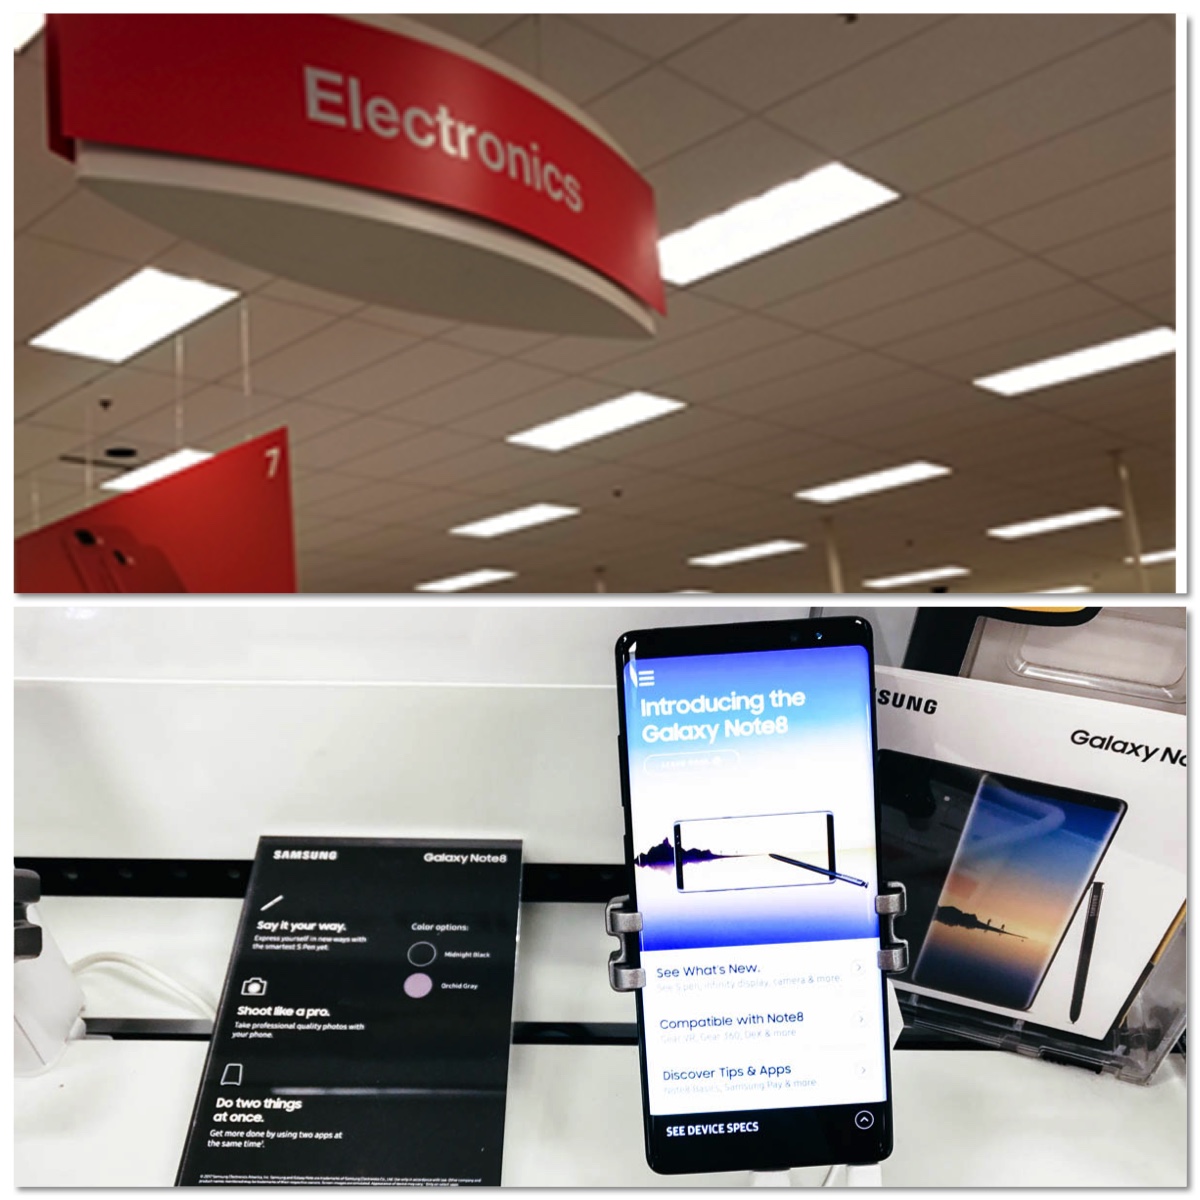 Samsung Galaxy Note8 Helps Moms Do It All - Increase productivity, take great pictures, jot notes .. Smartphone tech via Misty Nelson, frostedblog 